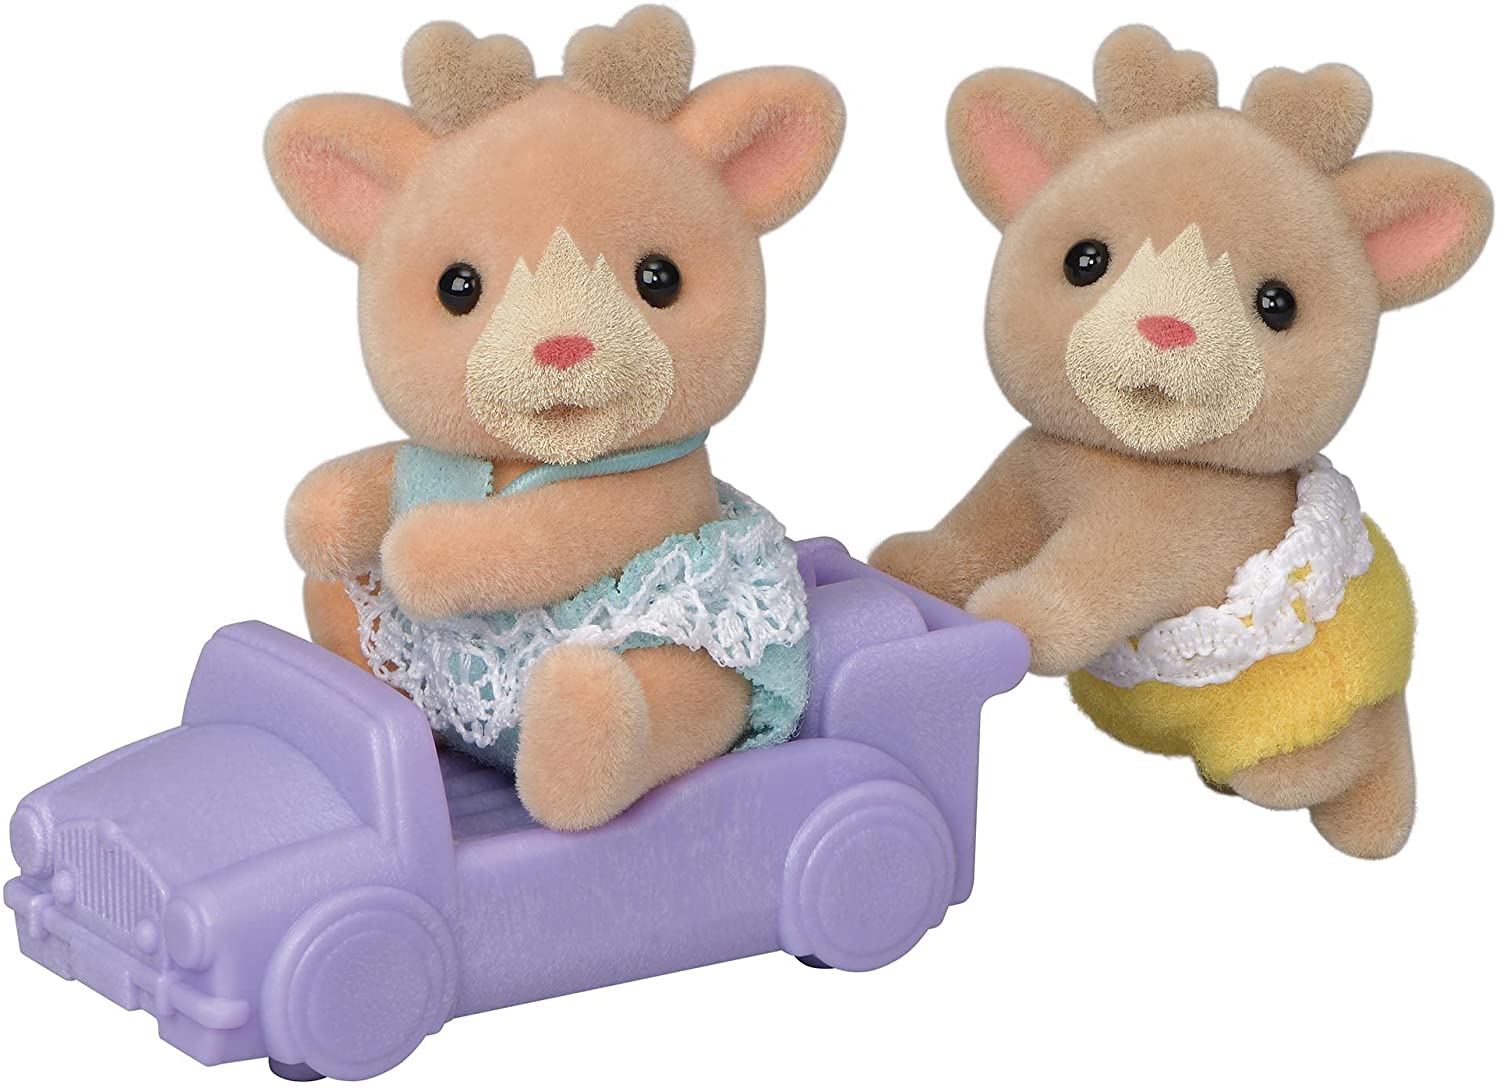 Sylvanian Families Malaysia - Look, there's a pink one! This